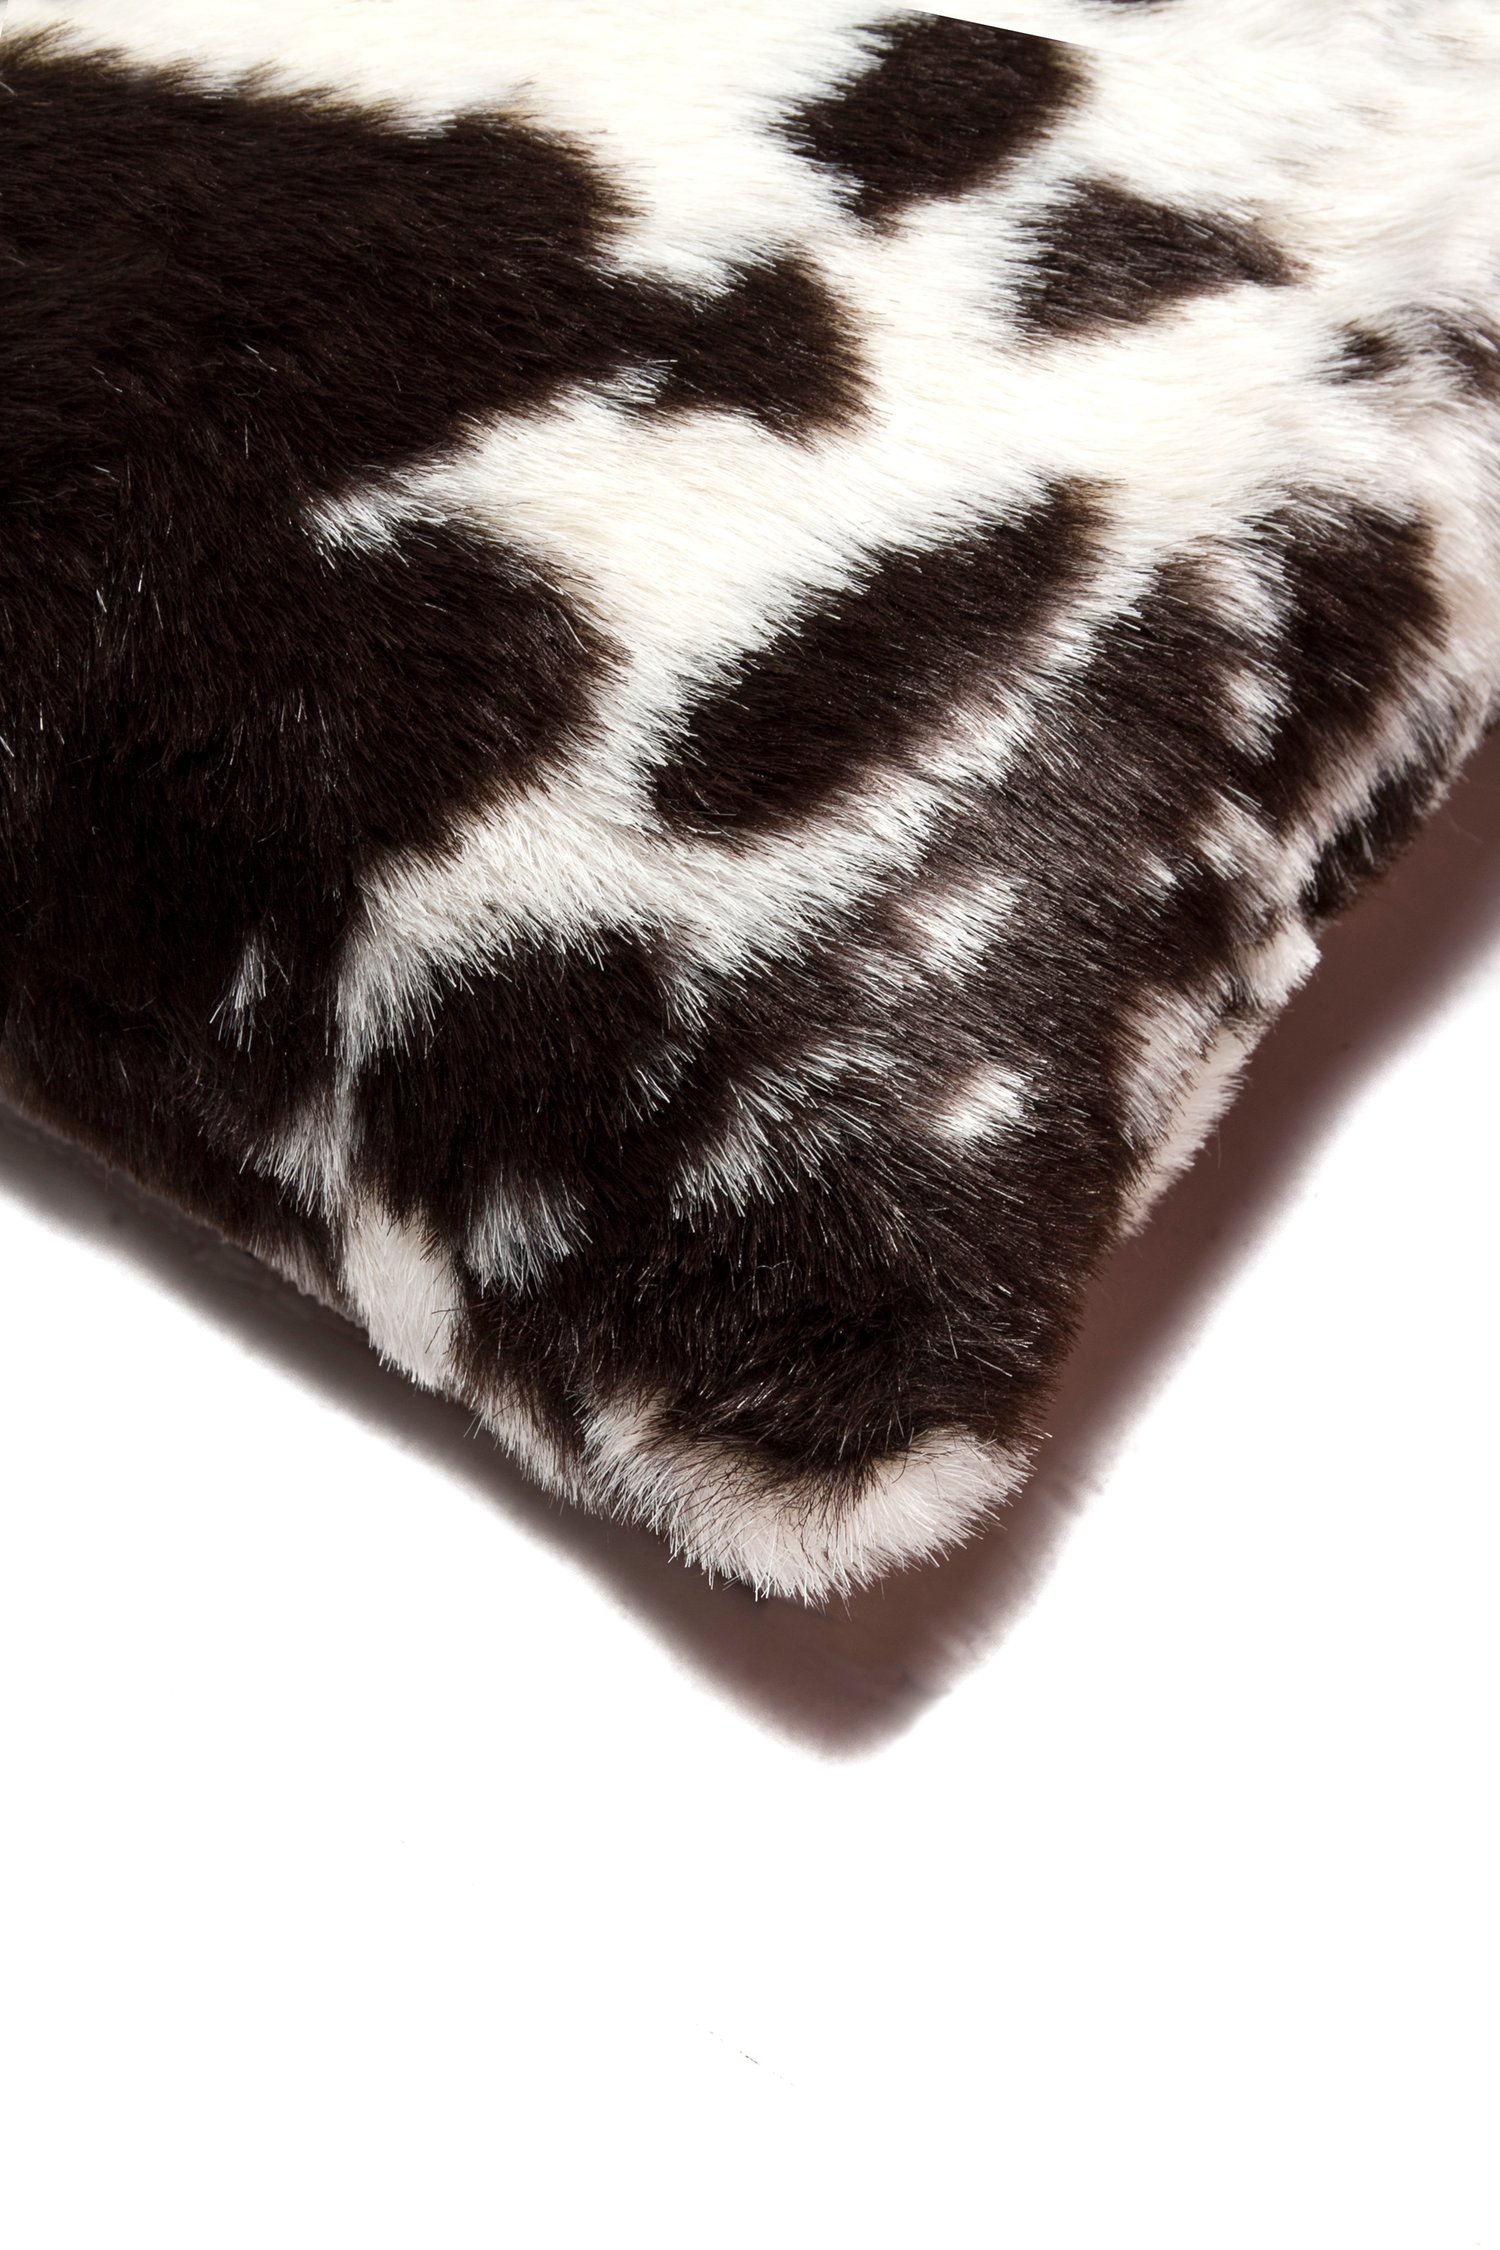 Image of  Jolly Brown White Faux Cowhide Pillow